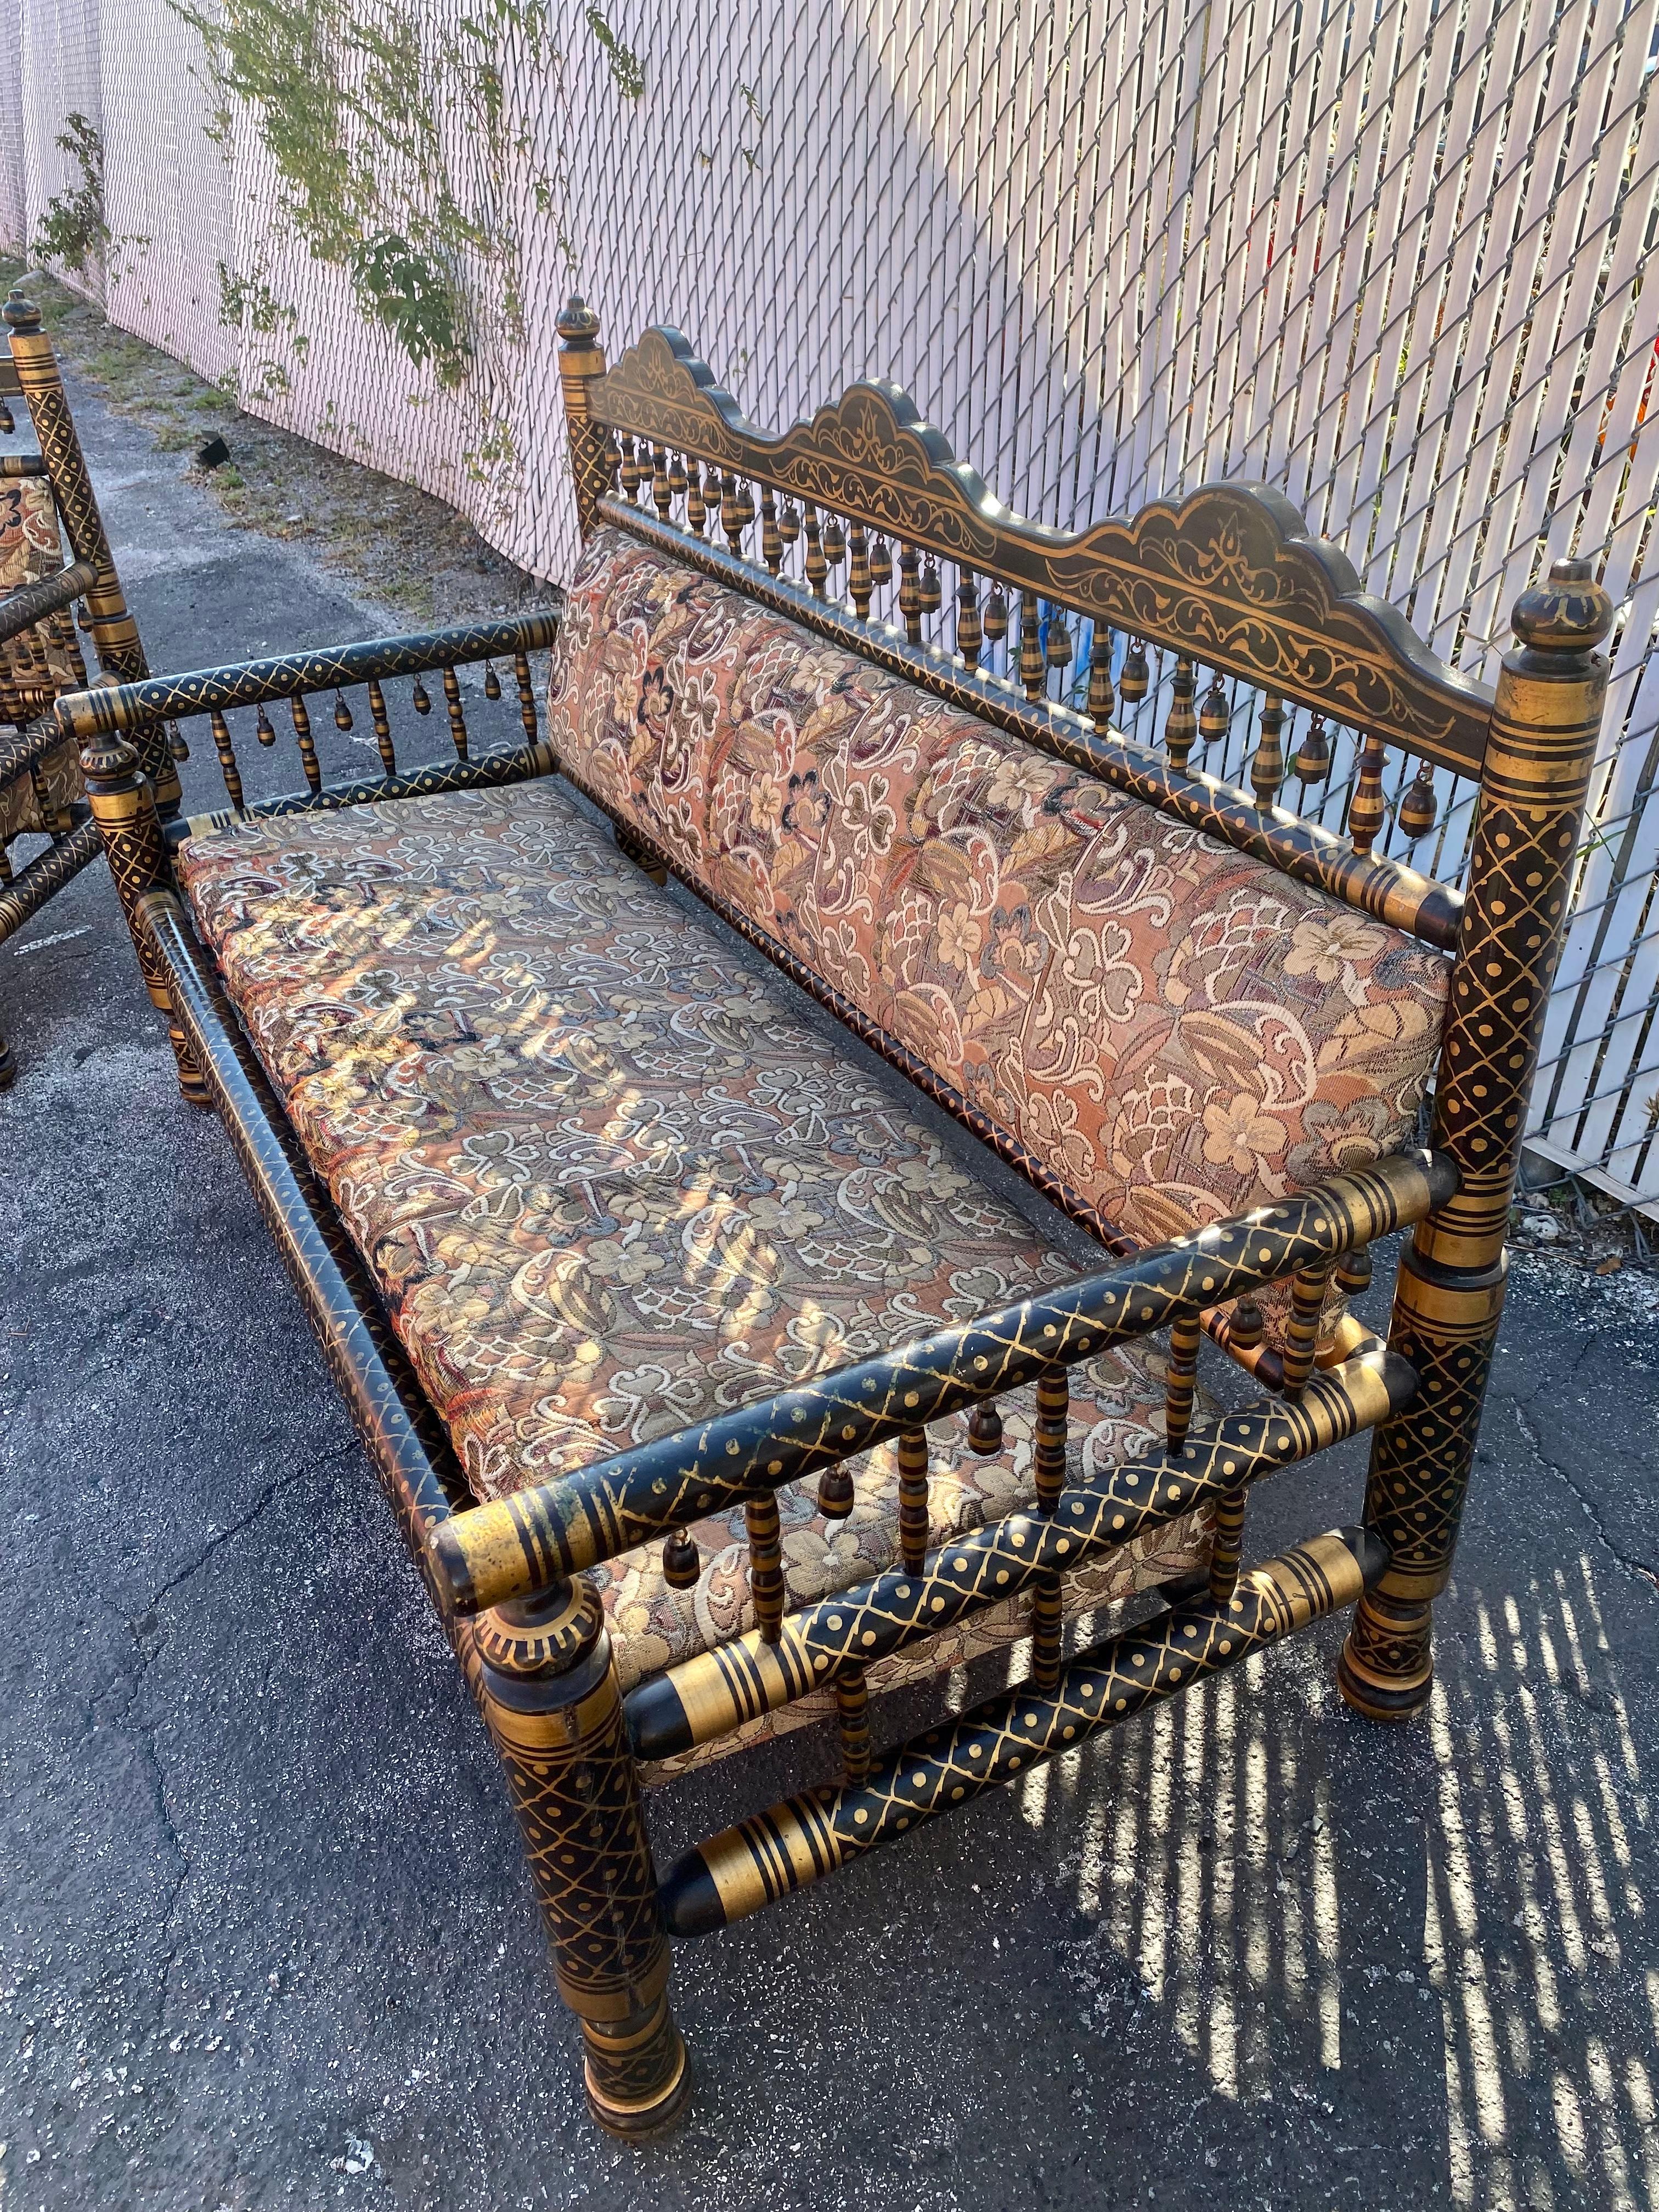 1930s Hand Painted Spindle Tassels Punjabi Floral Chinoiserie Style Sofa Chairs In Good Condition For Sale In Fort Lauderdale, FL